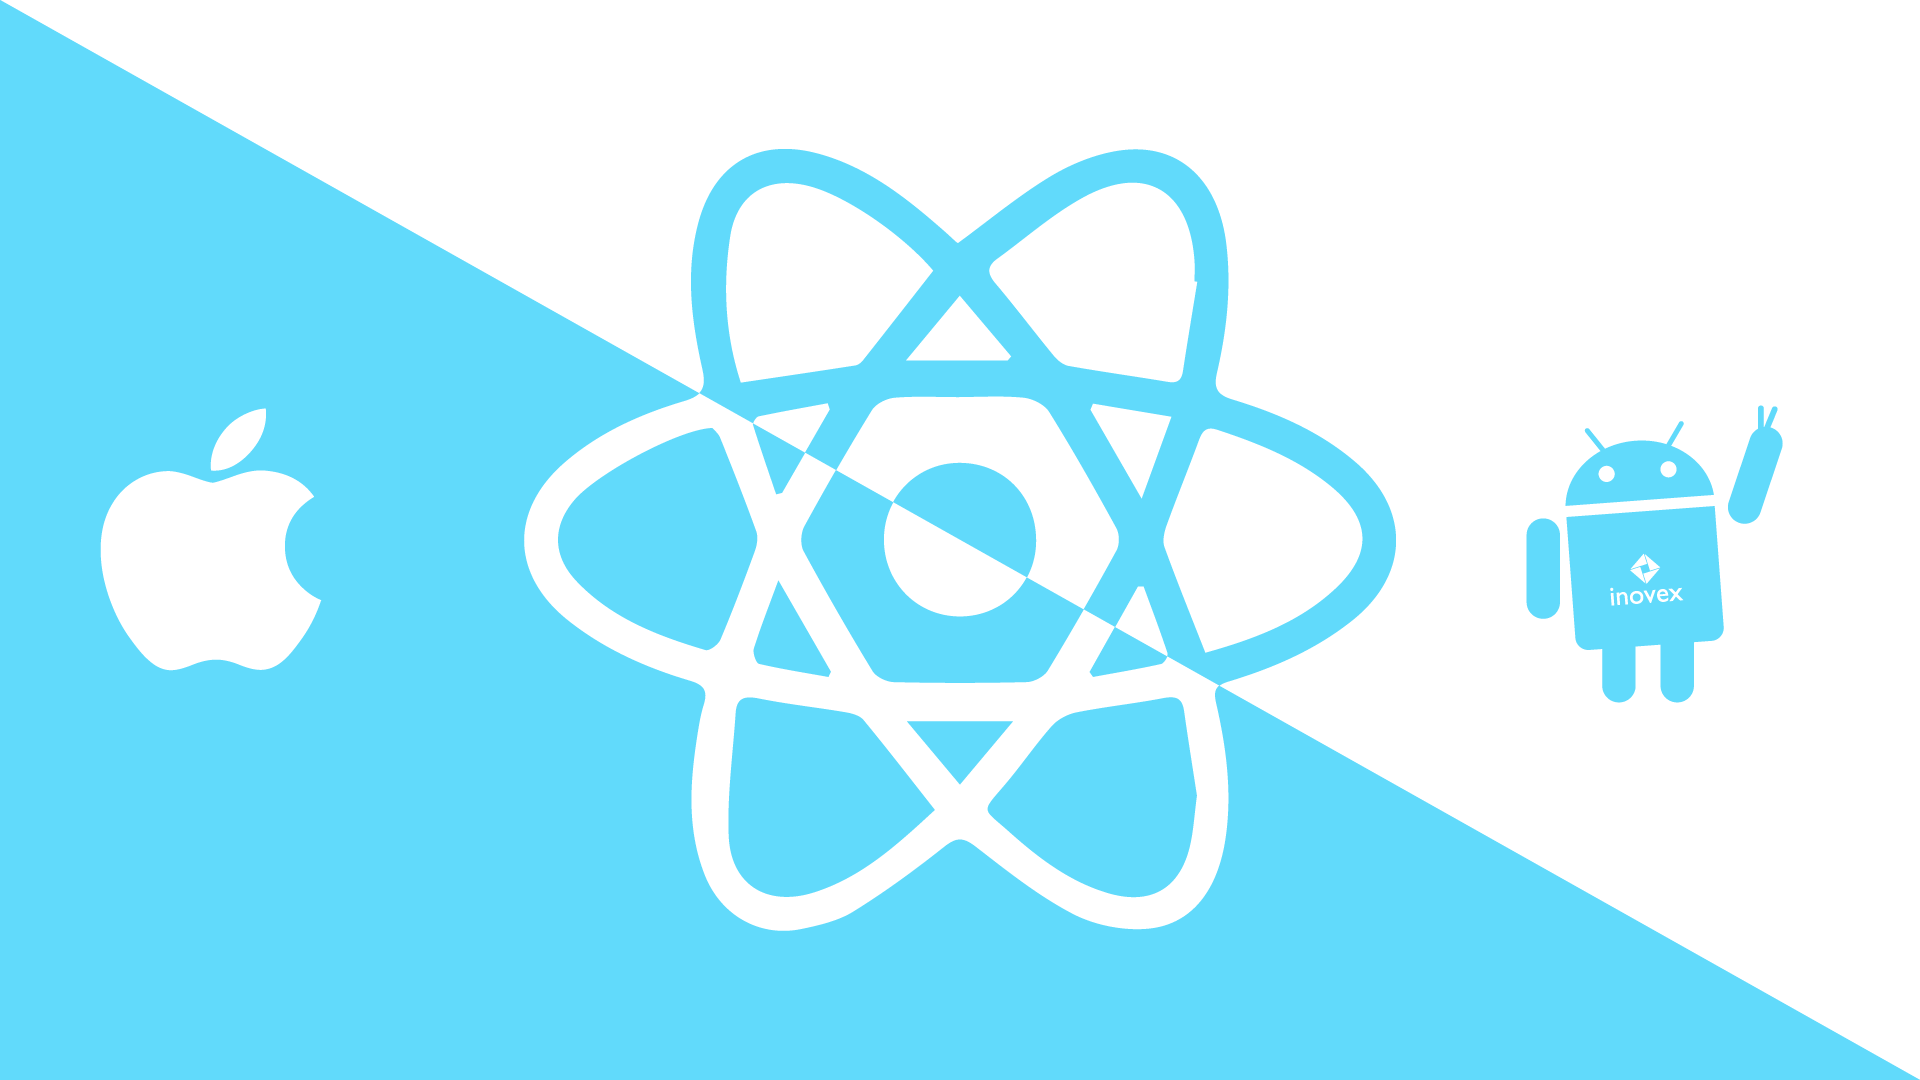 How expensive is building a CRM with React Native?